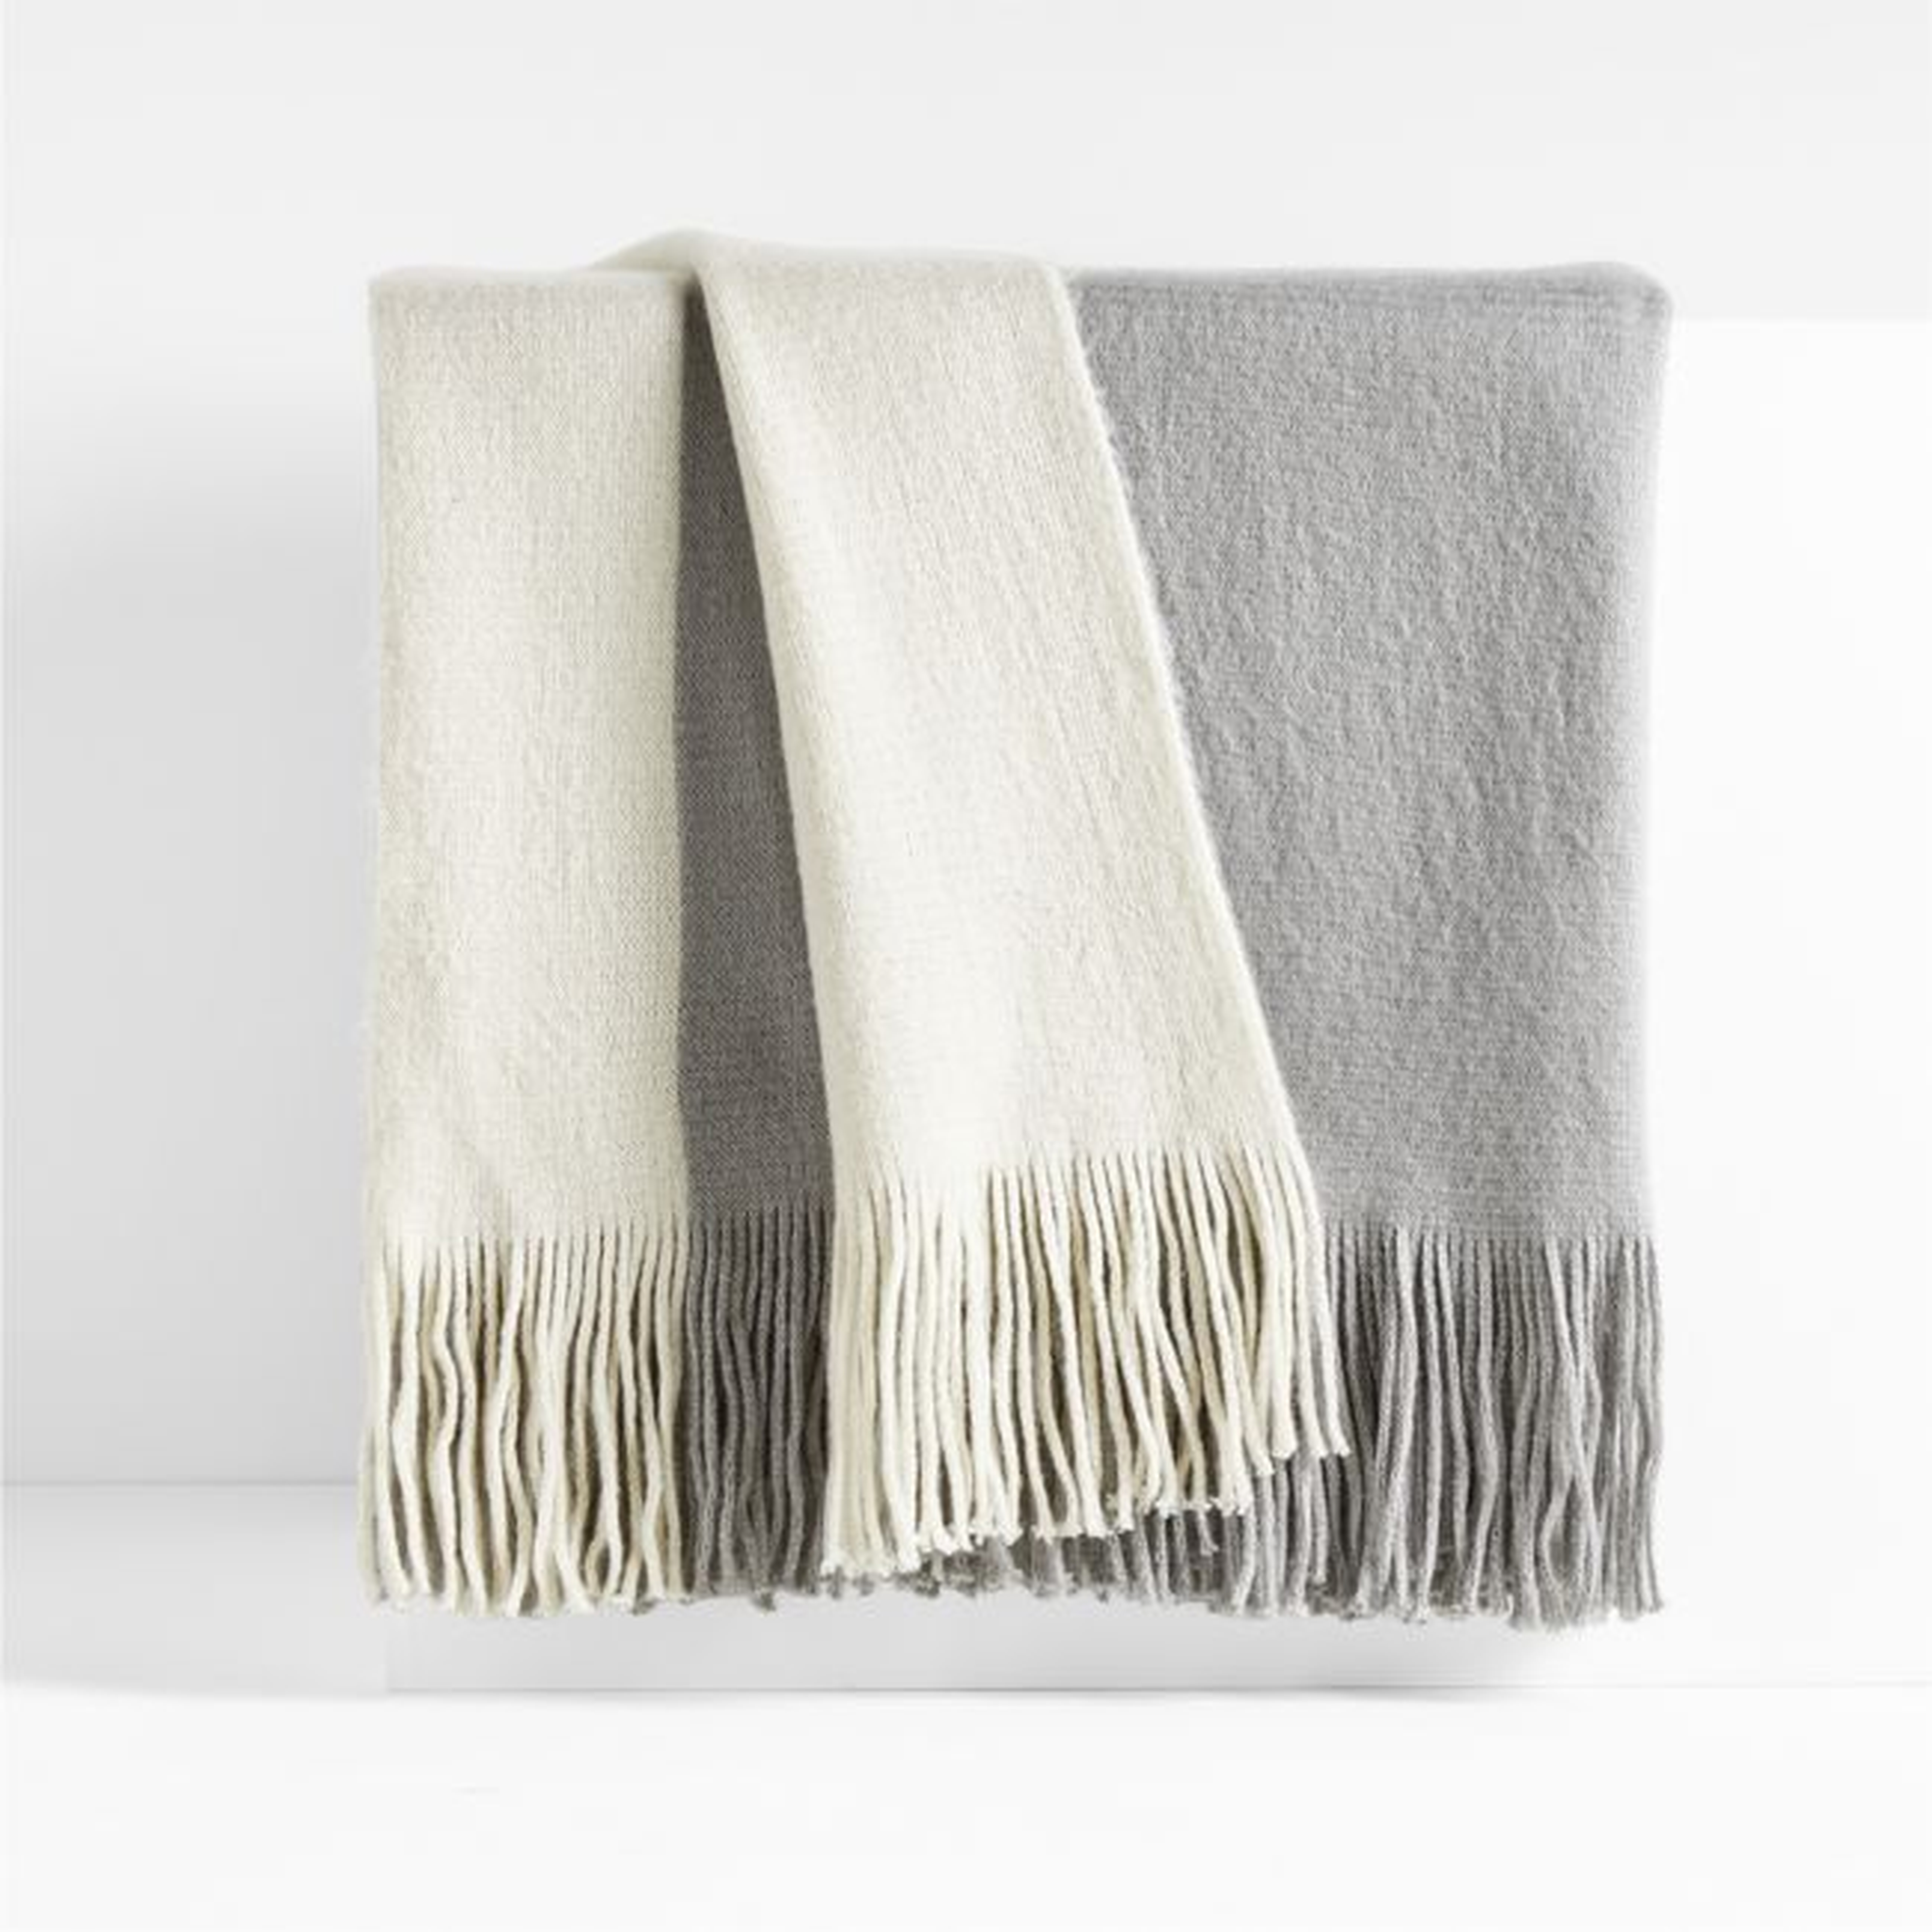 Tepi 70"x55" Grey Throw Blanket - Crate and Barrel